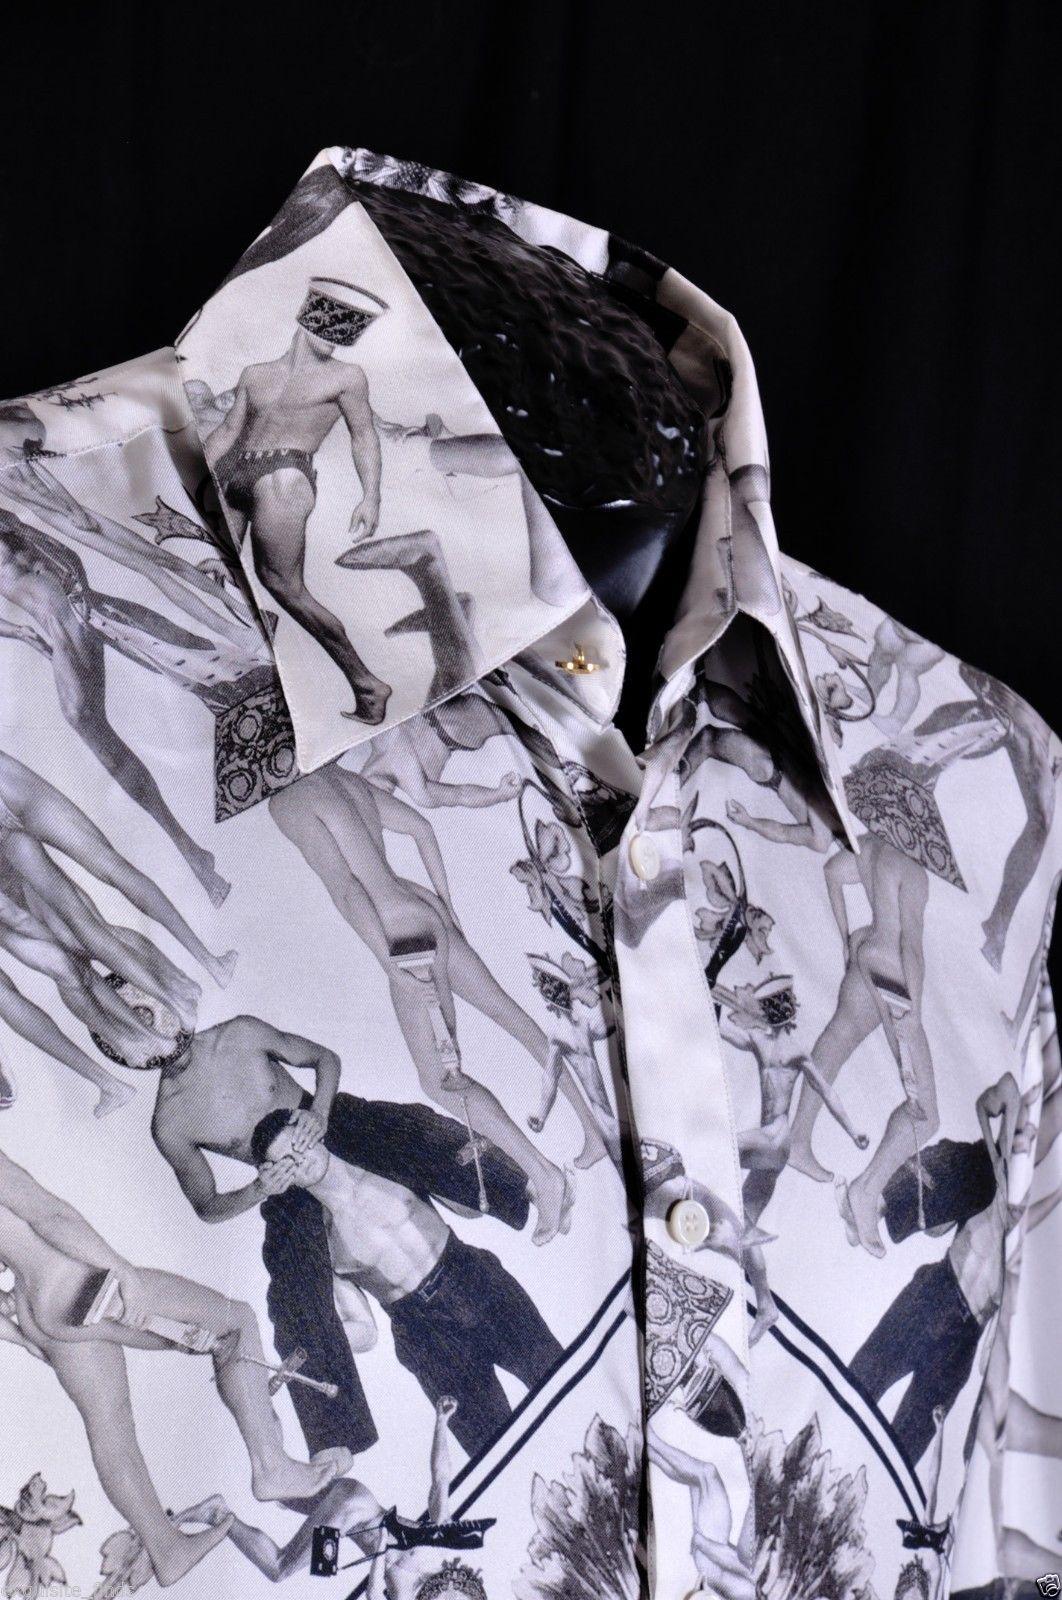 NEW VERSACE 100% SILK SHIRT in ICONIC BLACK and WHITE PRINT



100% silk shirt featuring the label’s iconic print throughout in eye catching black and white hues. 

Long sleeves

Gold Tone Medusa neck and cuff buttons

Italian size 40 - 15